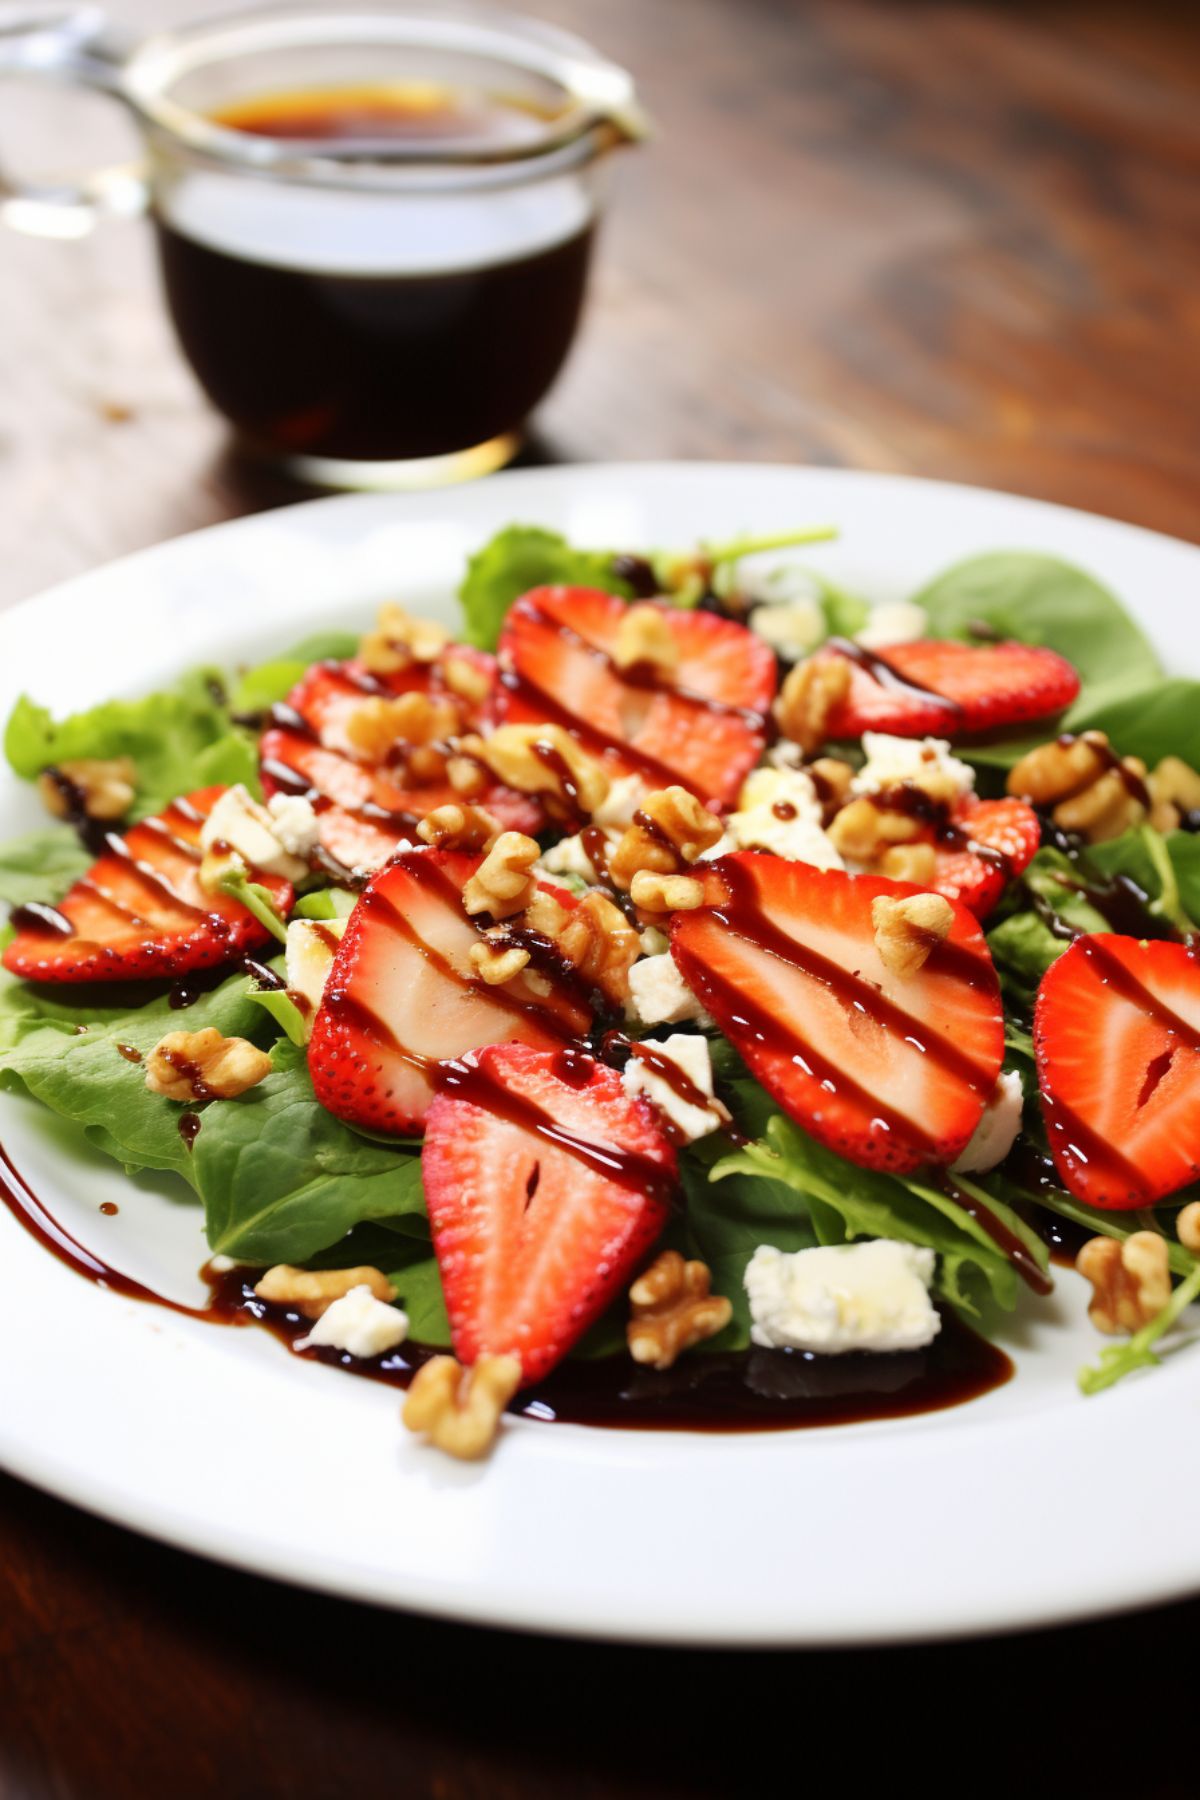 Balsamic glaze over a strawberry, walnut and goat cheese salad in a shallow white bowl.